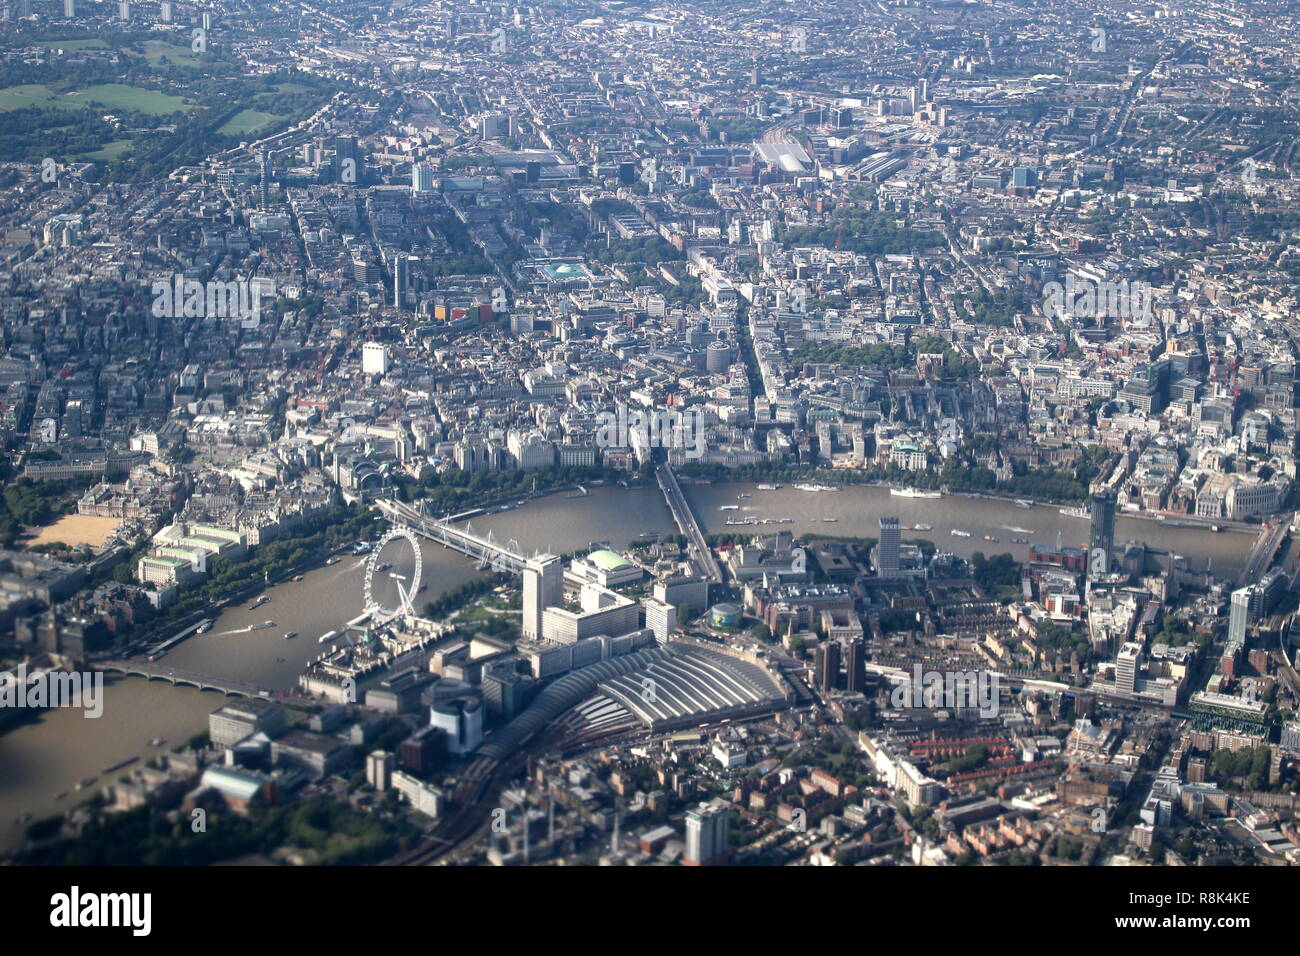 Aerial view of London featuring the London Eye and the River Thames Stock Photo